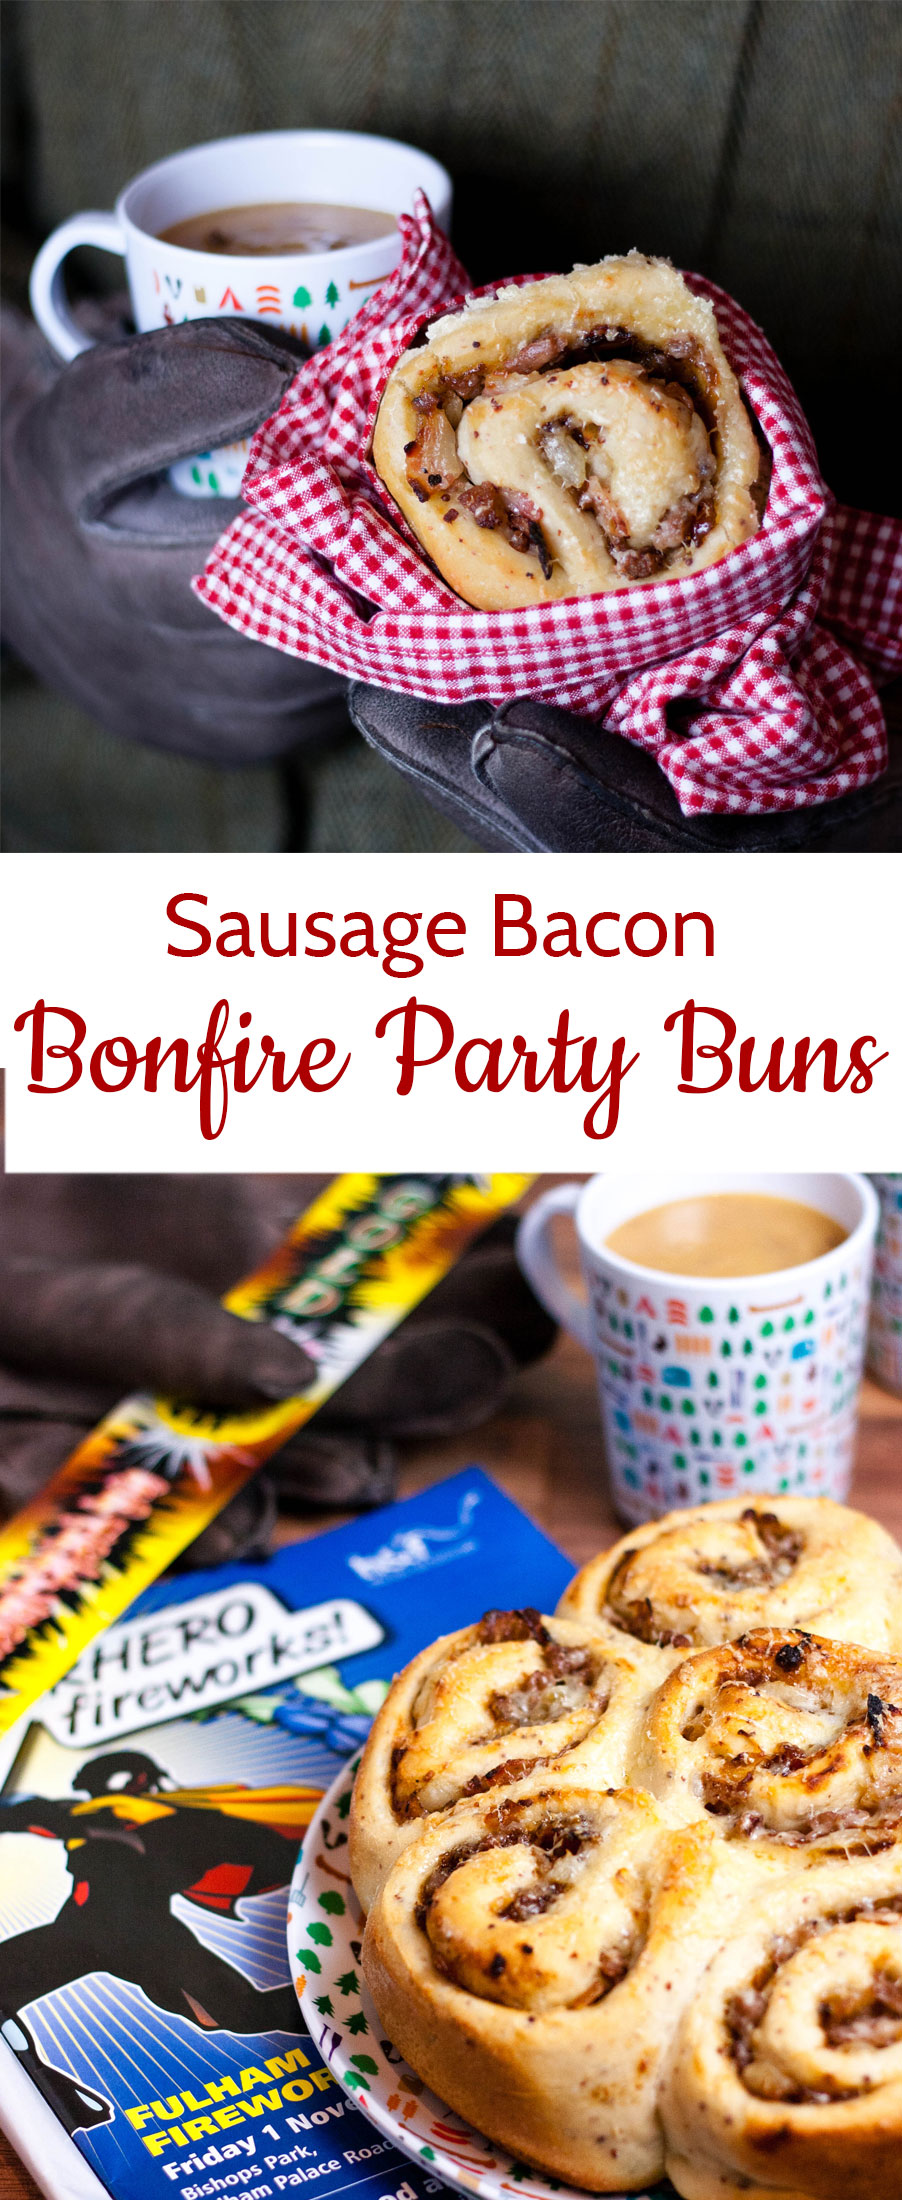 These sausage and bacon savoury bread whirls are perfect enjoyed outside by the bonfire.